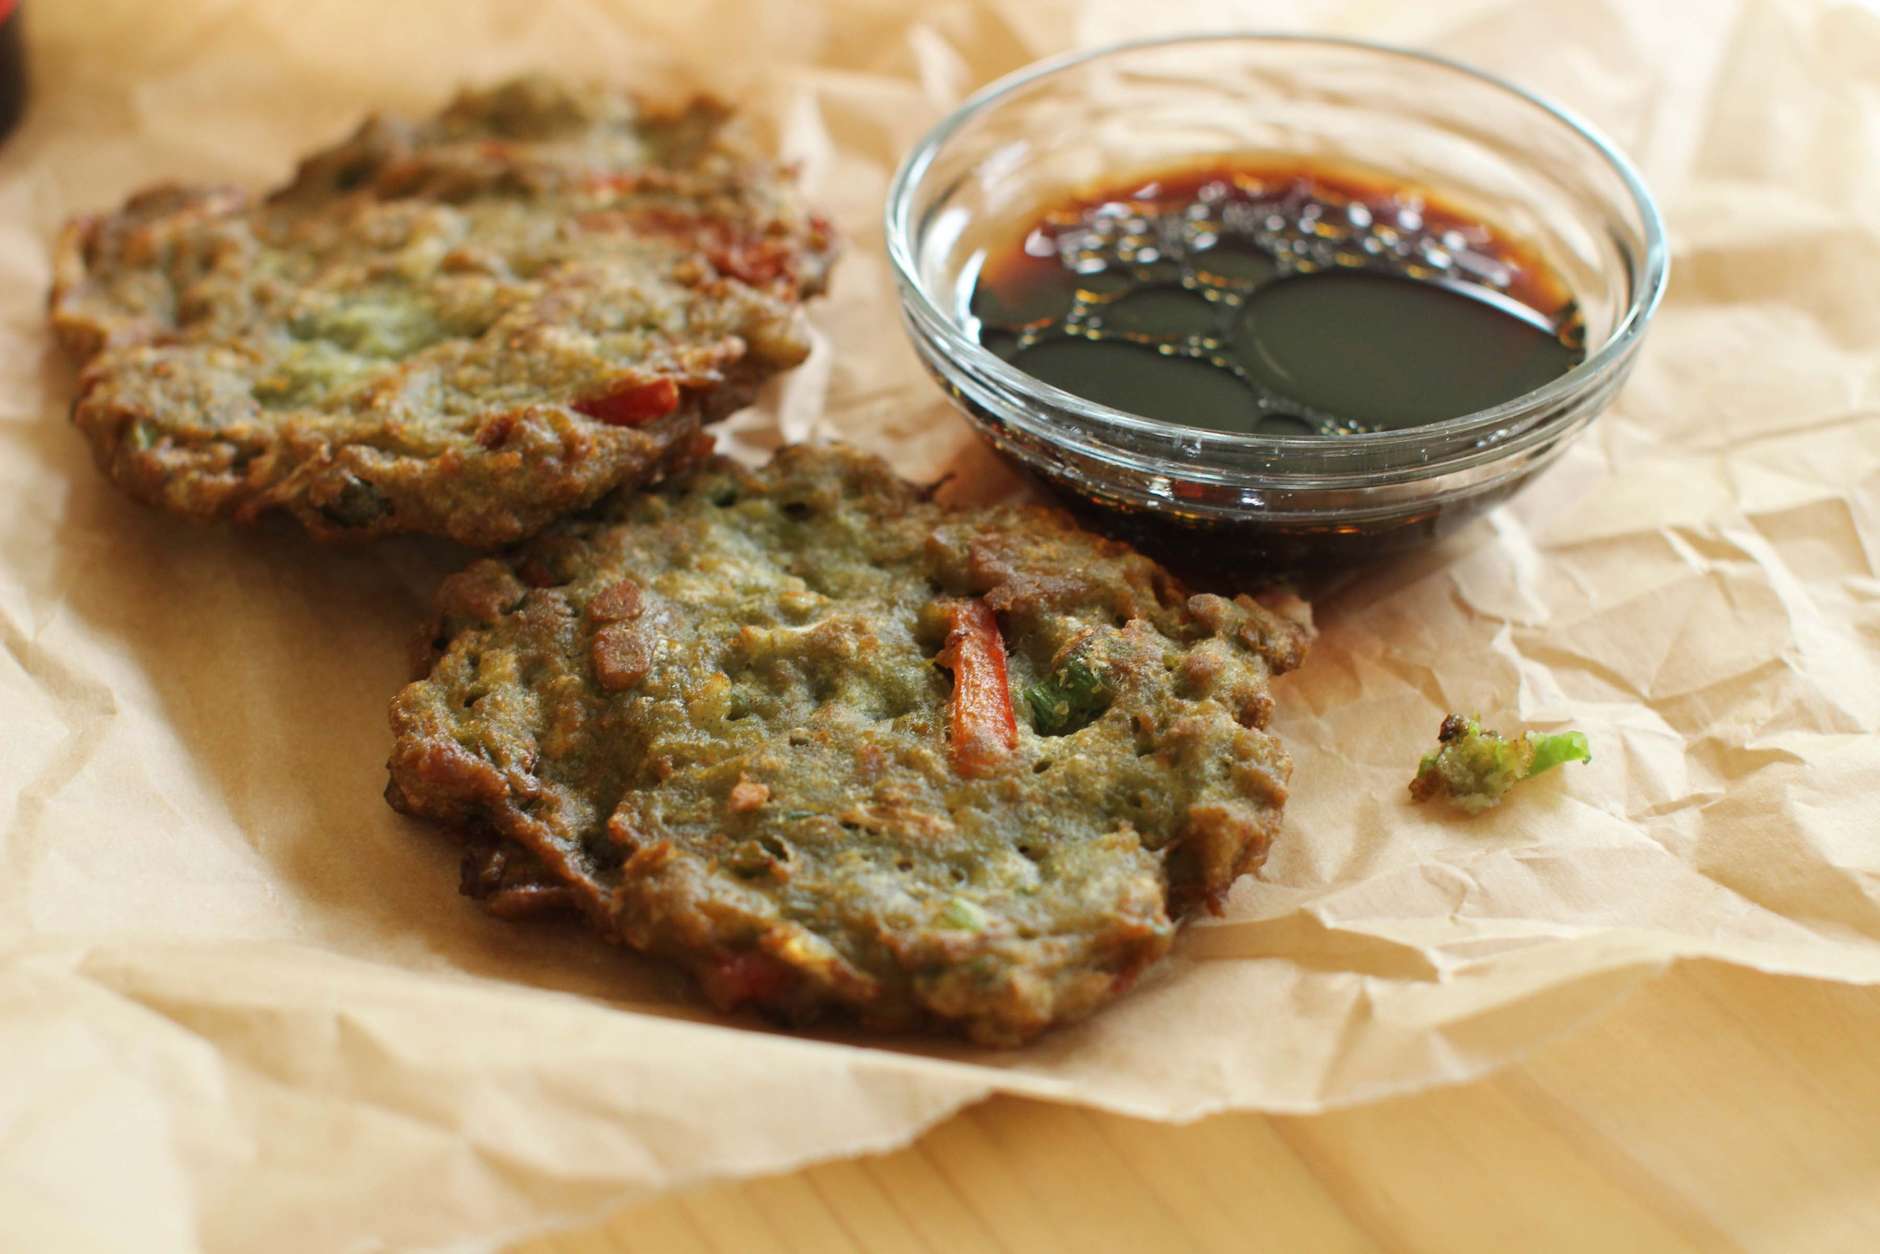 This July 13, 2015 photo shows Korean mung bean pancakes in Concord, N.H. Mung beans have been a staple of the cuisines of India, China, Korea and Southeast Asia for thousands of years. And with good reason. They are a delicious and healthy source of protein and fiber. (AP Photo/Matthew Mead)